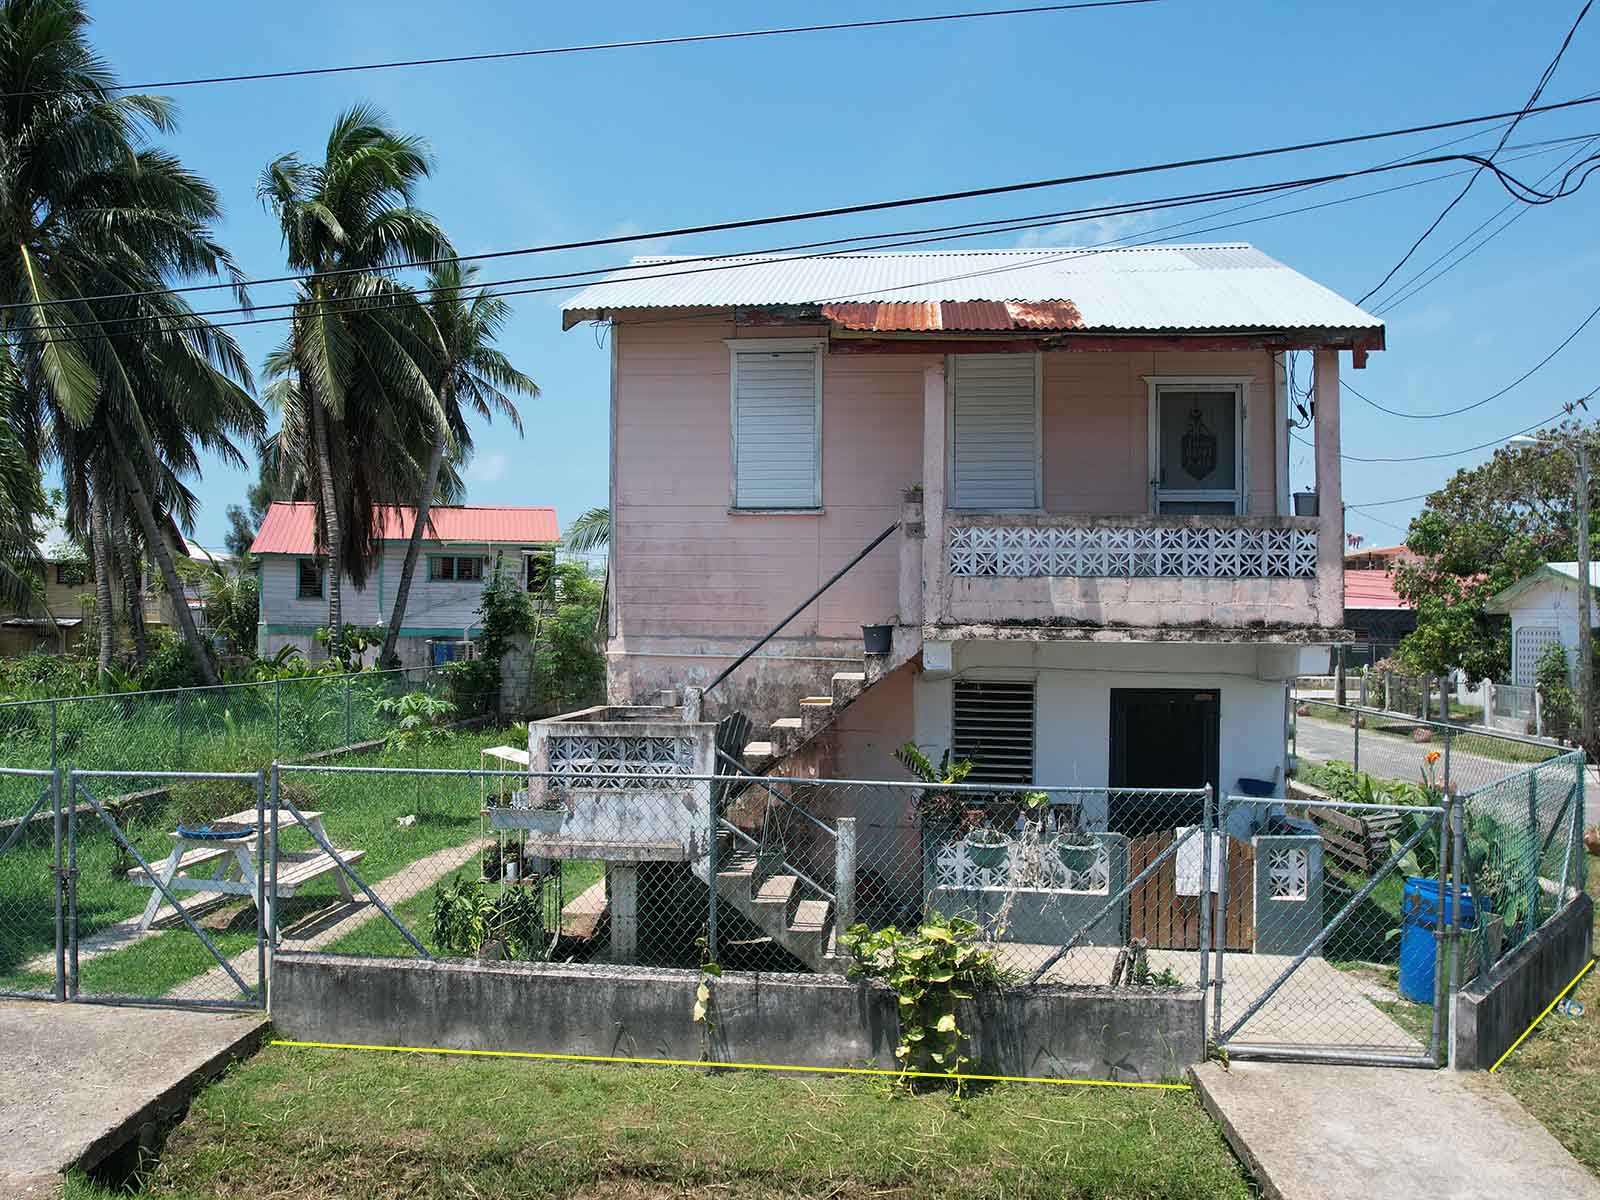 FOR-SALE: Two Storey Residential House located in Belize City, Belize.